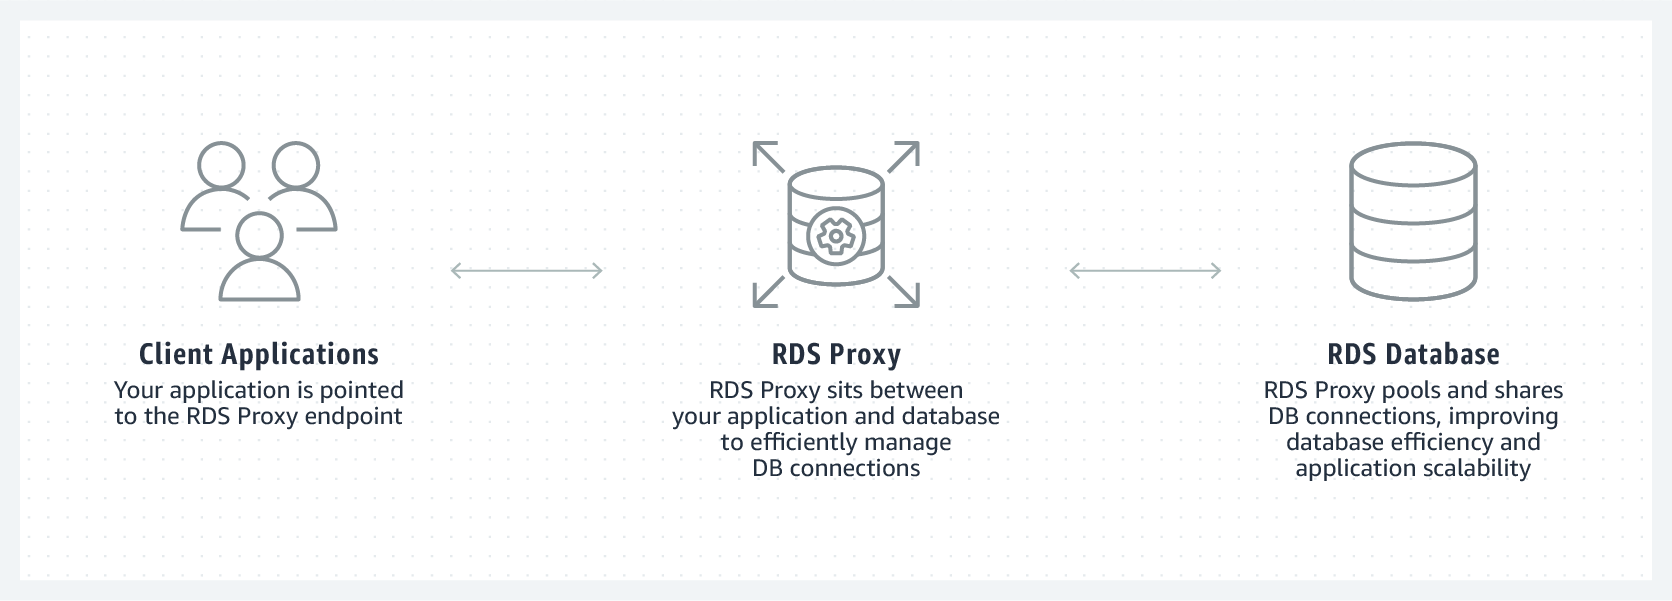 product-page-diagram_RDS Proxy_How-it-works@2x.a18916586f49718a16fd11579d168ab08c83d333.png